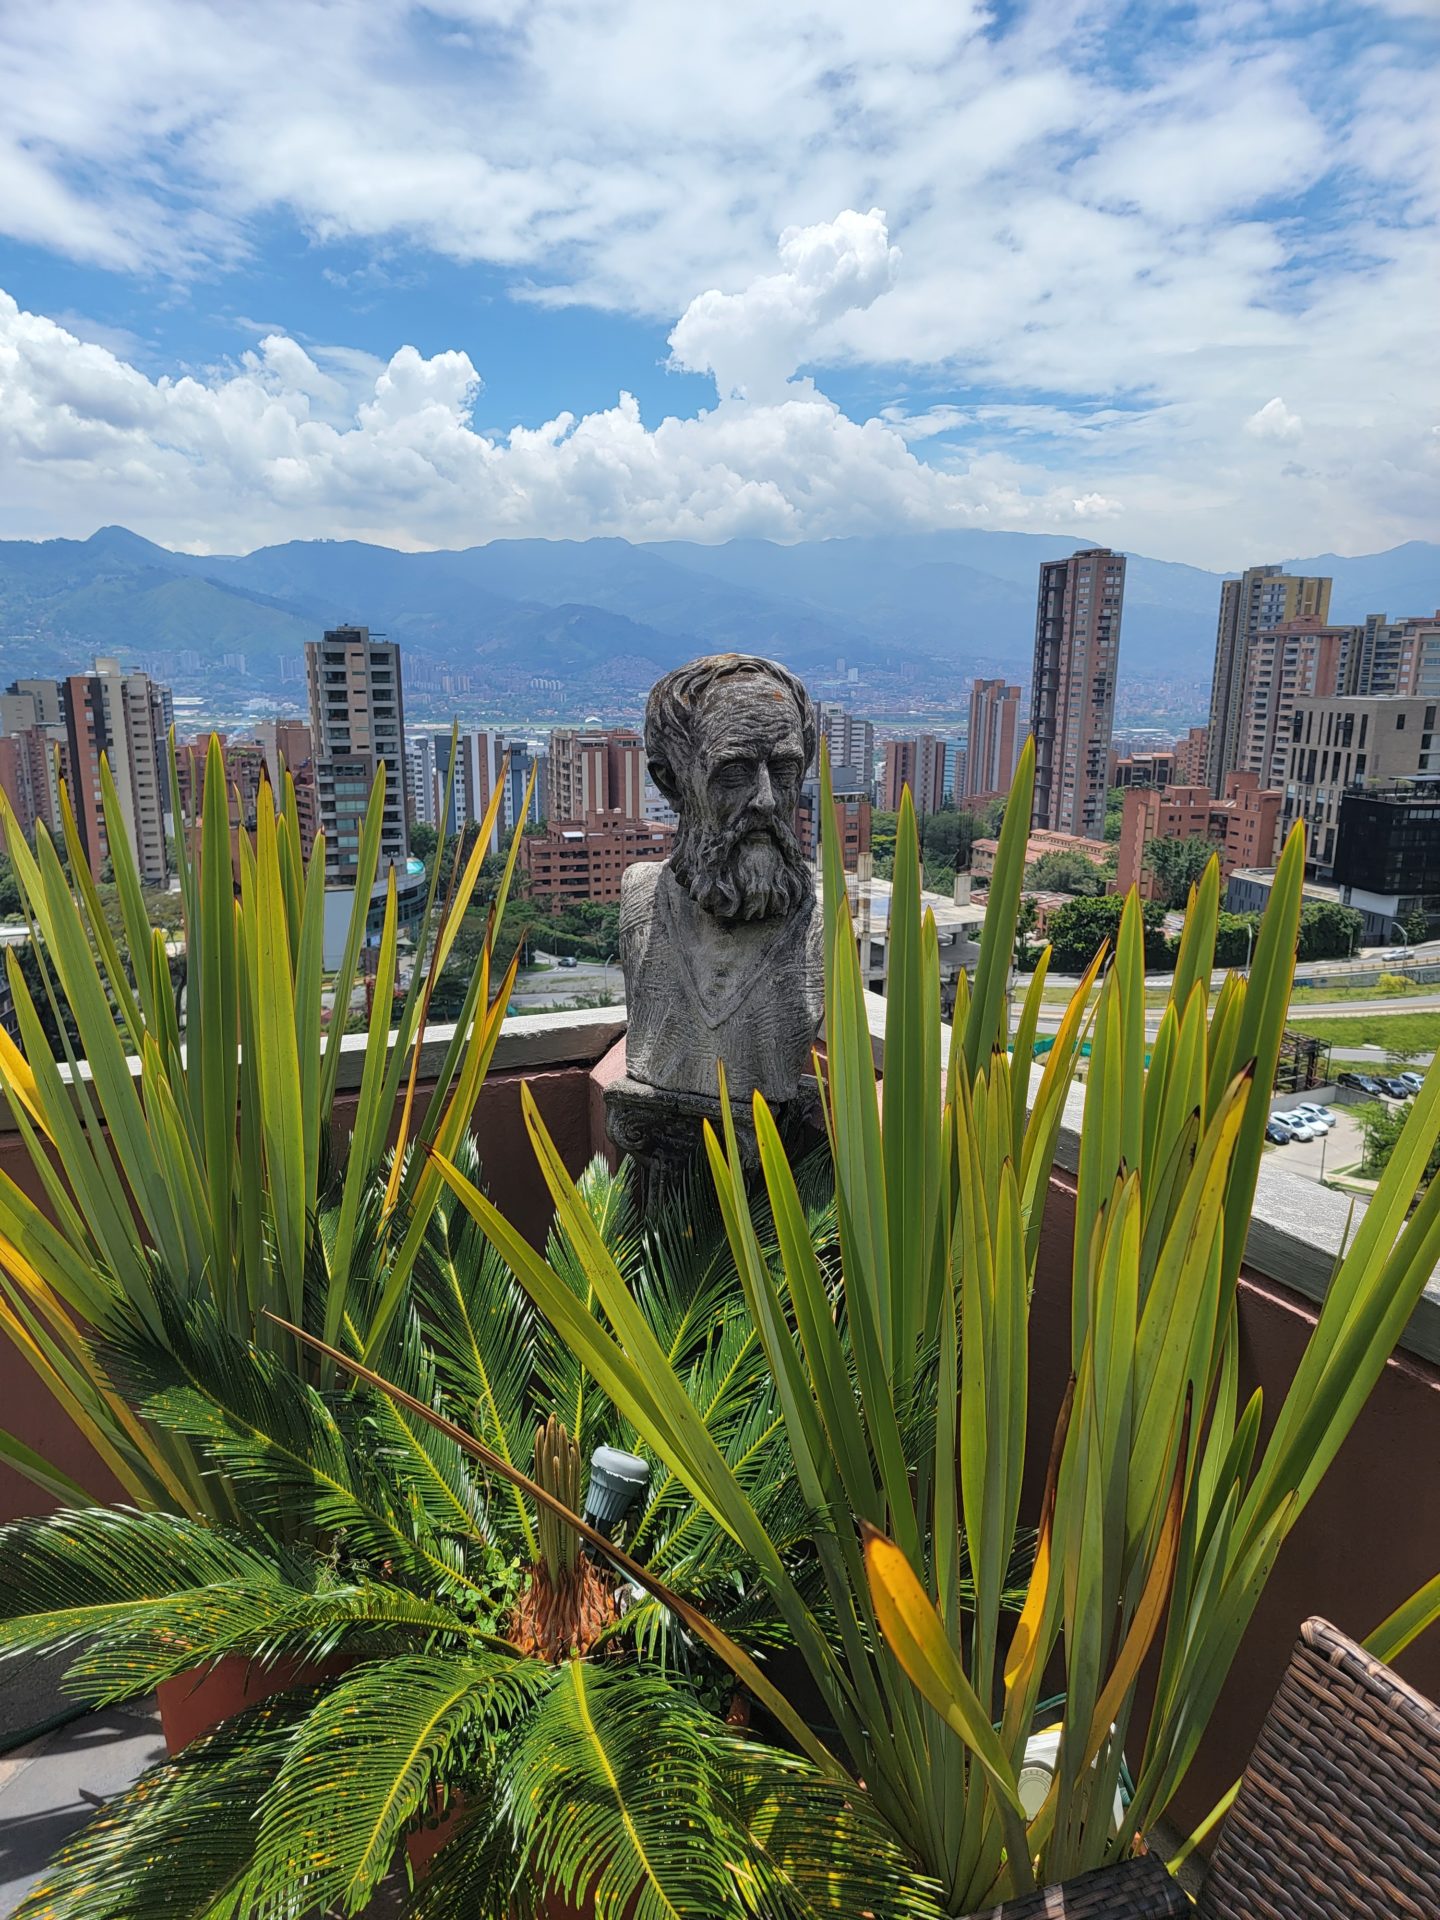 a statue of a man with a beard and a city in the background